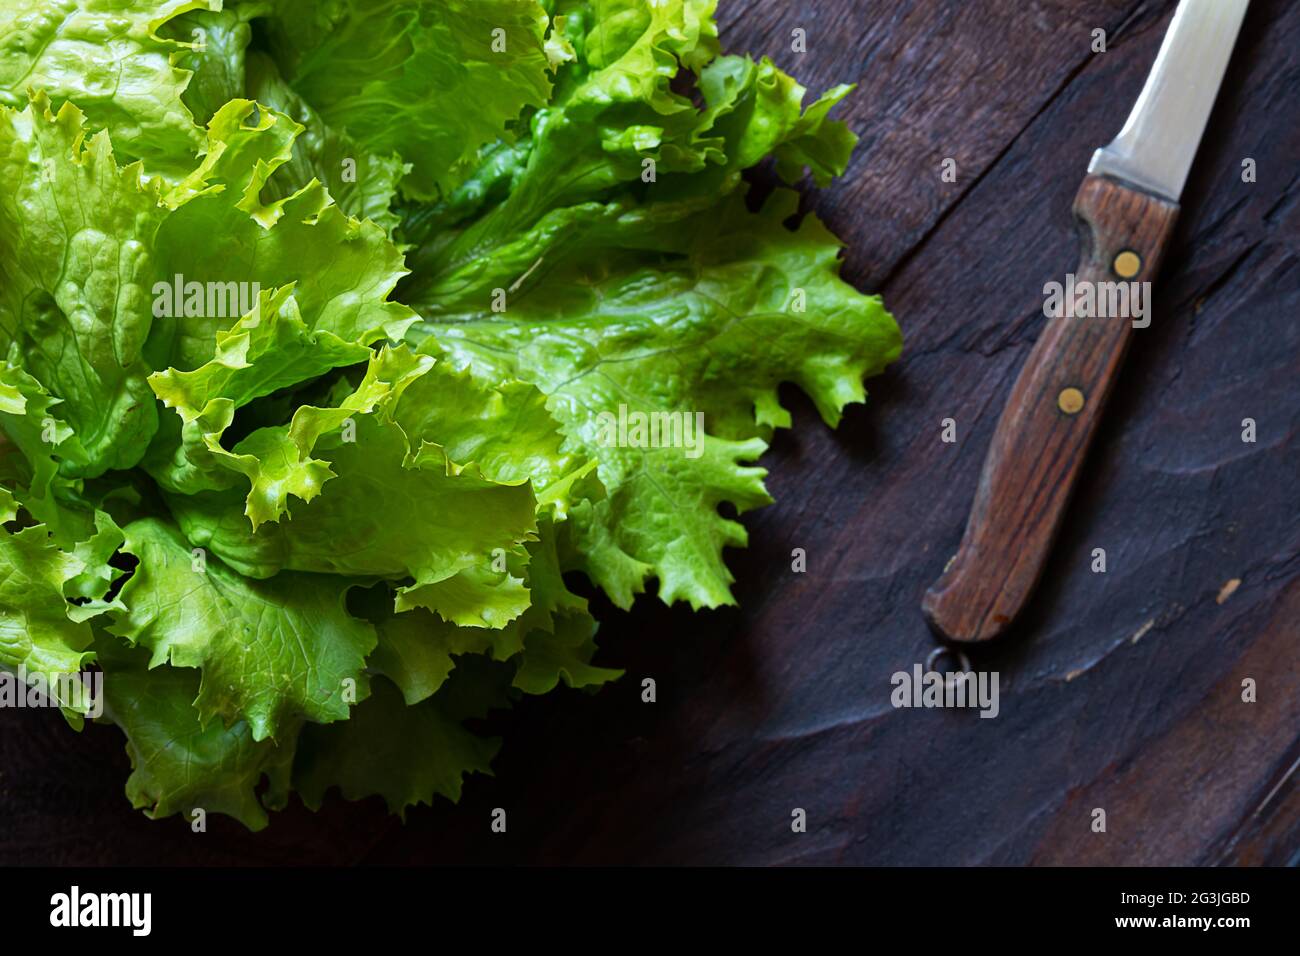 Fresh organic salad from a vegetable garden and a knife on an old wooden table, the concept of gardening and growing your own food, low key photo with Stock Photo